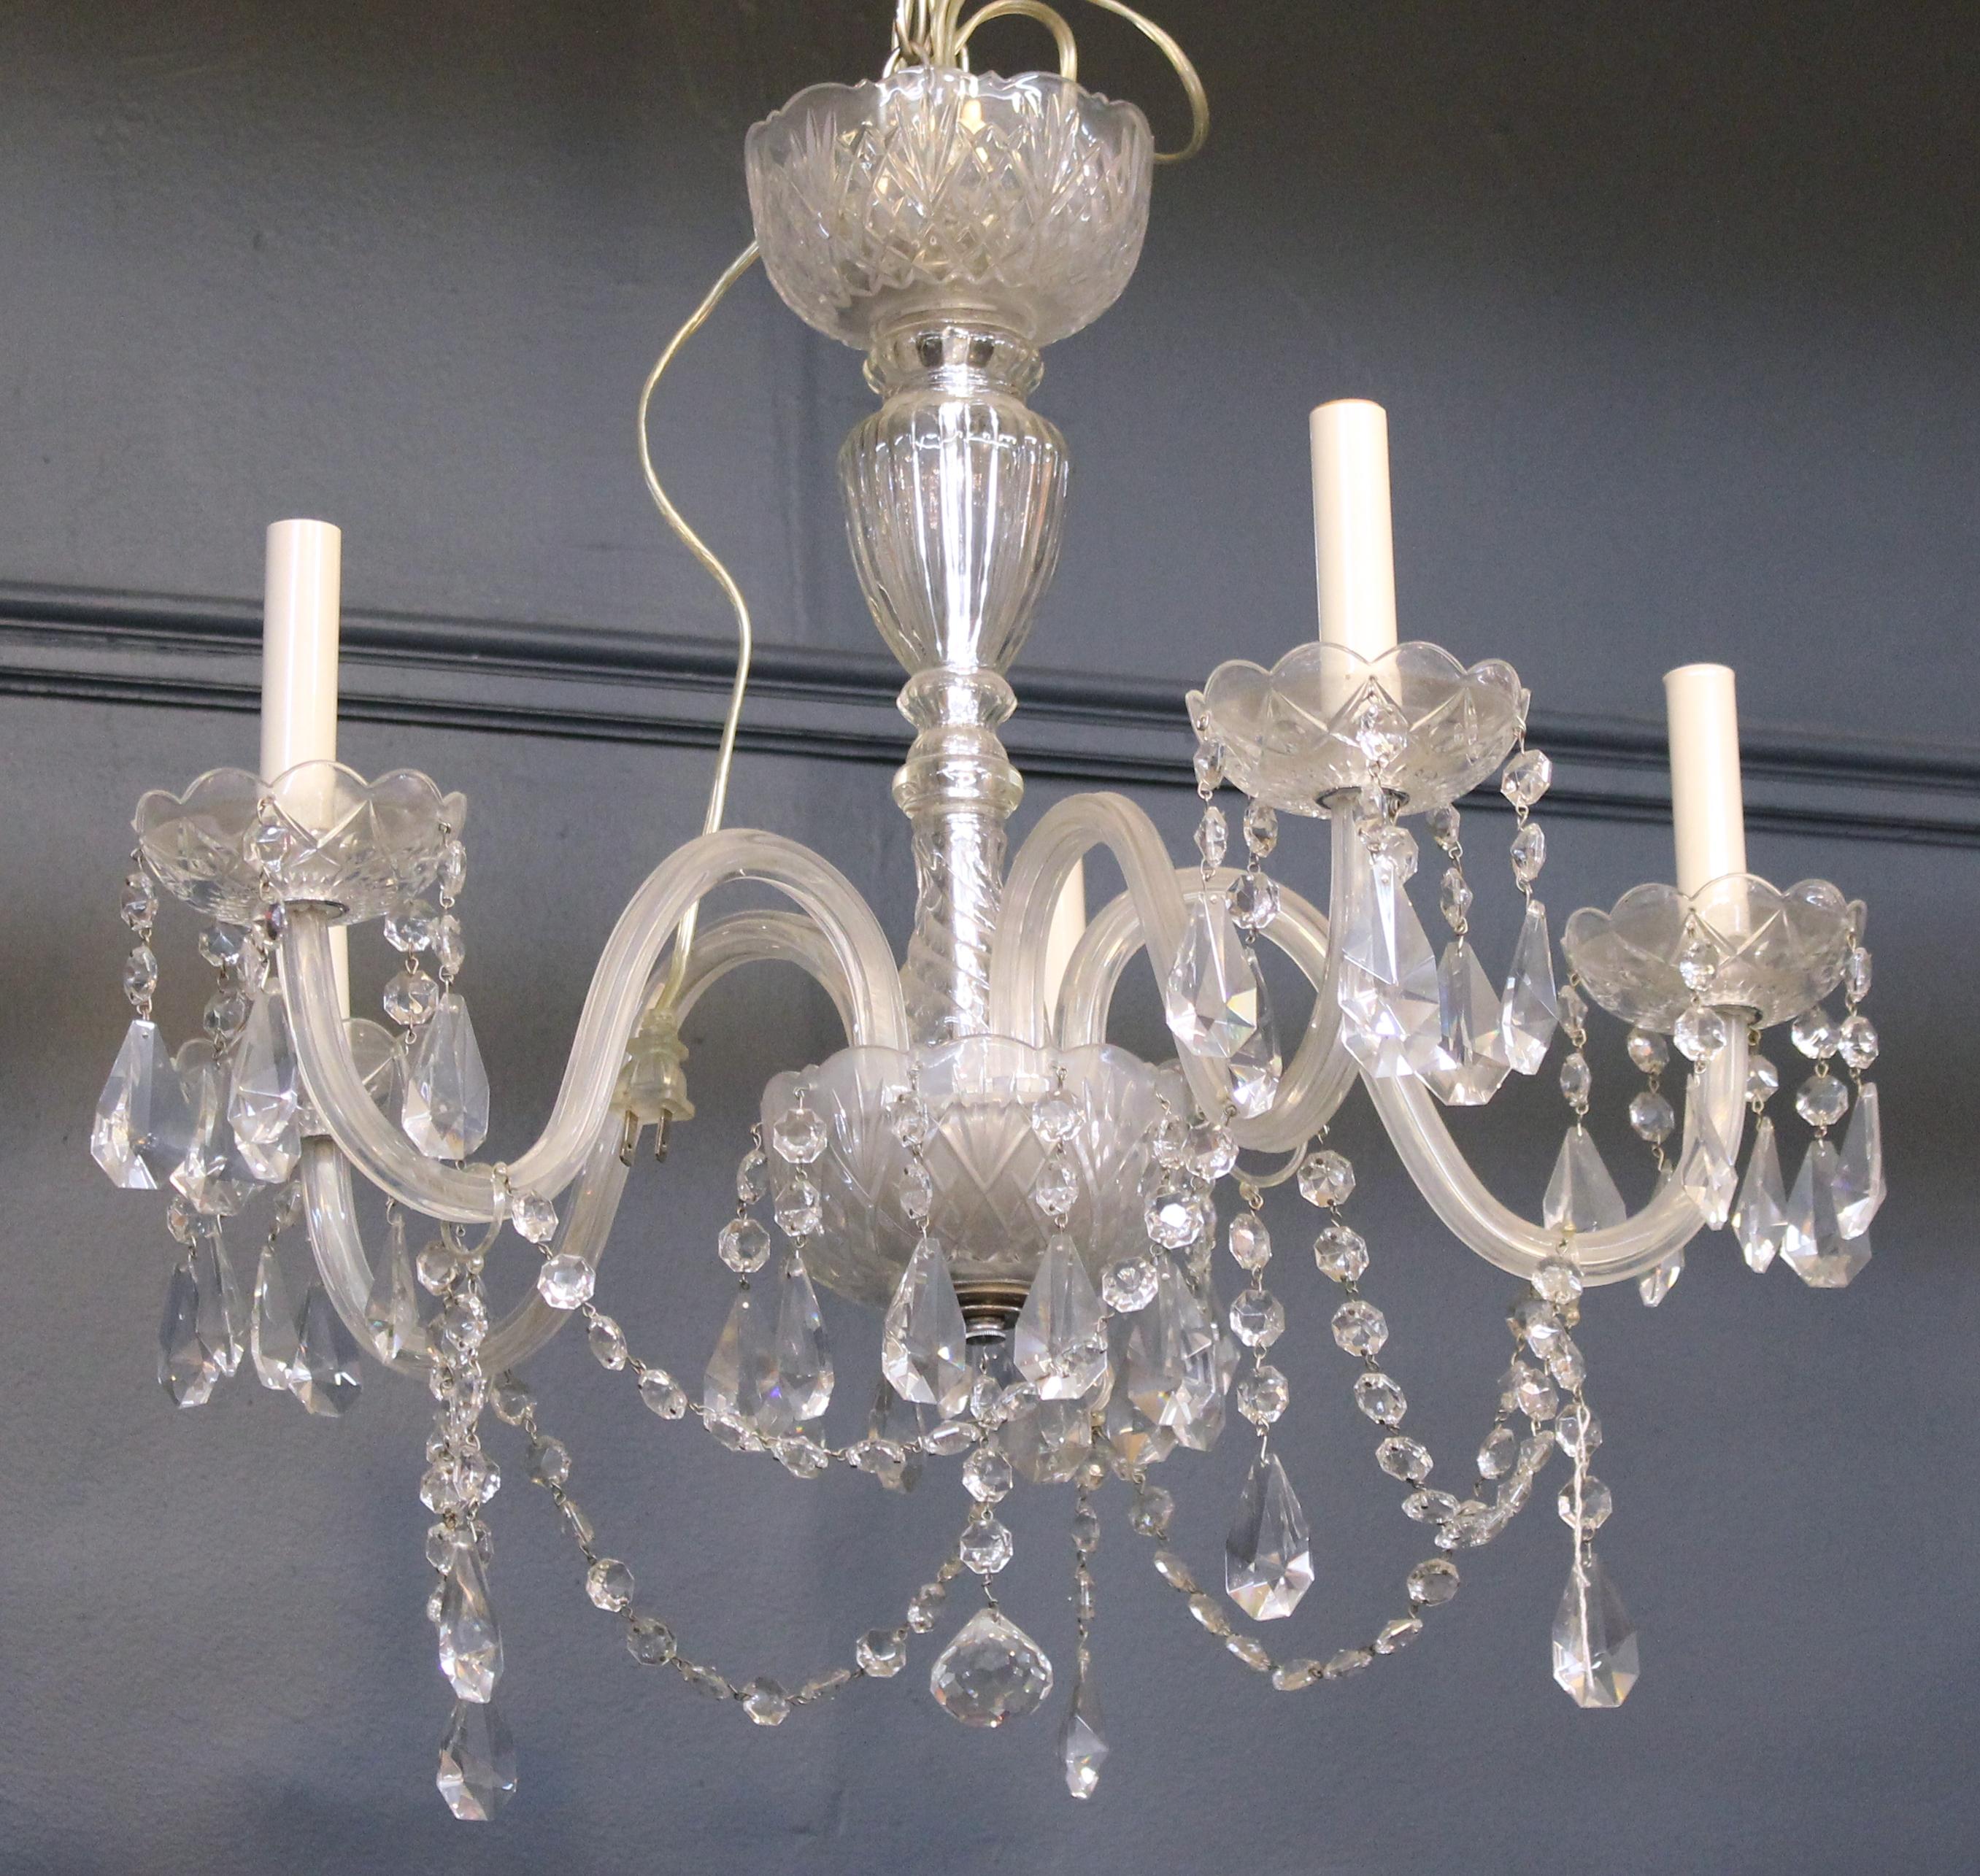 Neoclassical style crystal chandelier with five arms, probably manufactured in the mid-20th century. The piece is in great vintage condition.